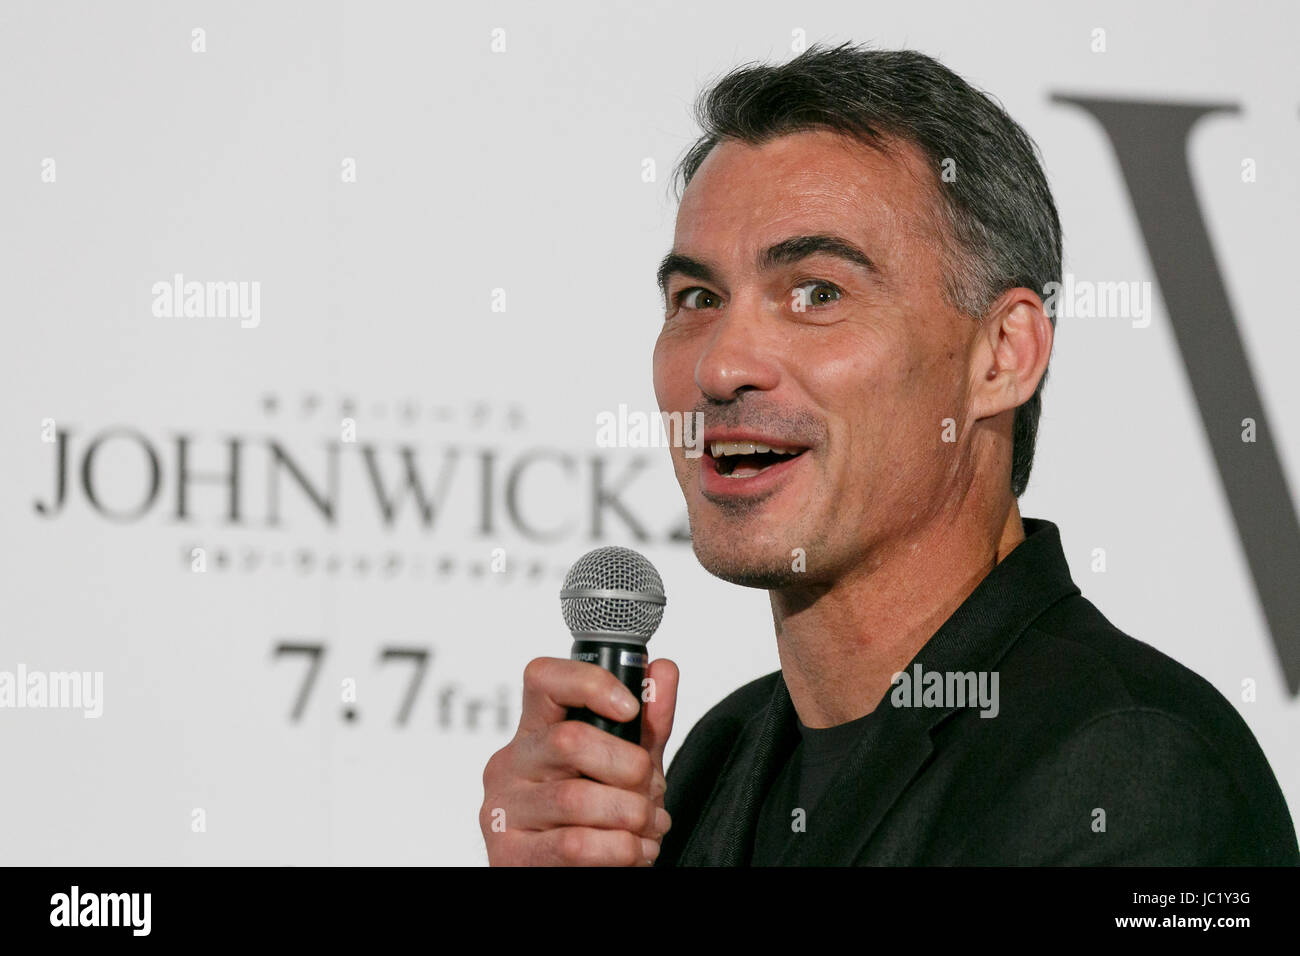 Tokyo, Japan. 13th June, 2017. Director Chad Stahelski speaks during a premiere for his movie John Wick: Chapter 2, on June 13, 2017, Tokyo, Japan. Keanu Reeves and Stahelski came to Japan to promote ''John Wick: Chapter 2, '' a much awaited sequel to their 2014 hit ''John Wick, '' which hits Japanese theaters on July 7. Credit: Rodrigo Reyes Marin/AFLO/Alamy Live News Stock Photo